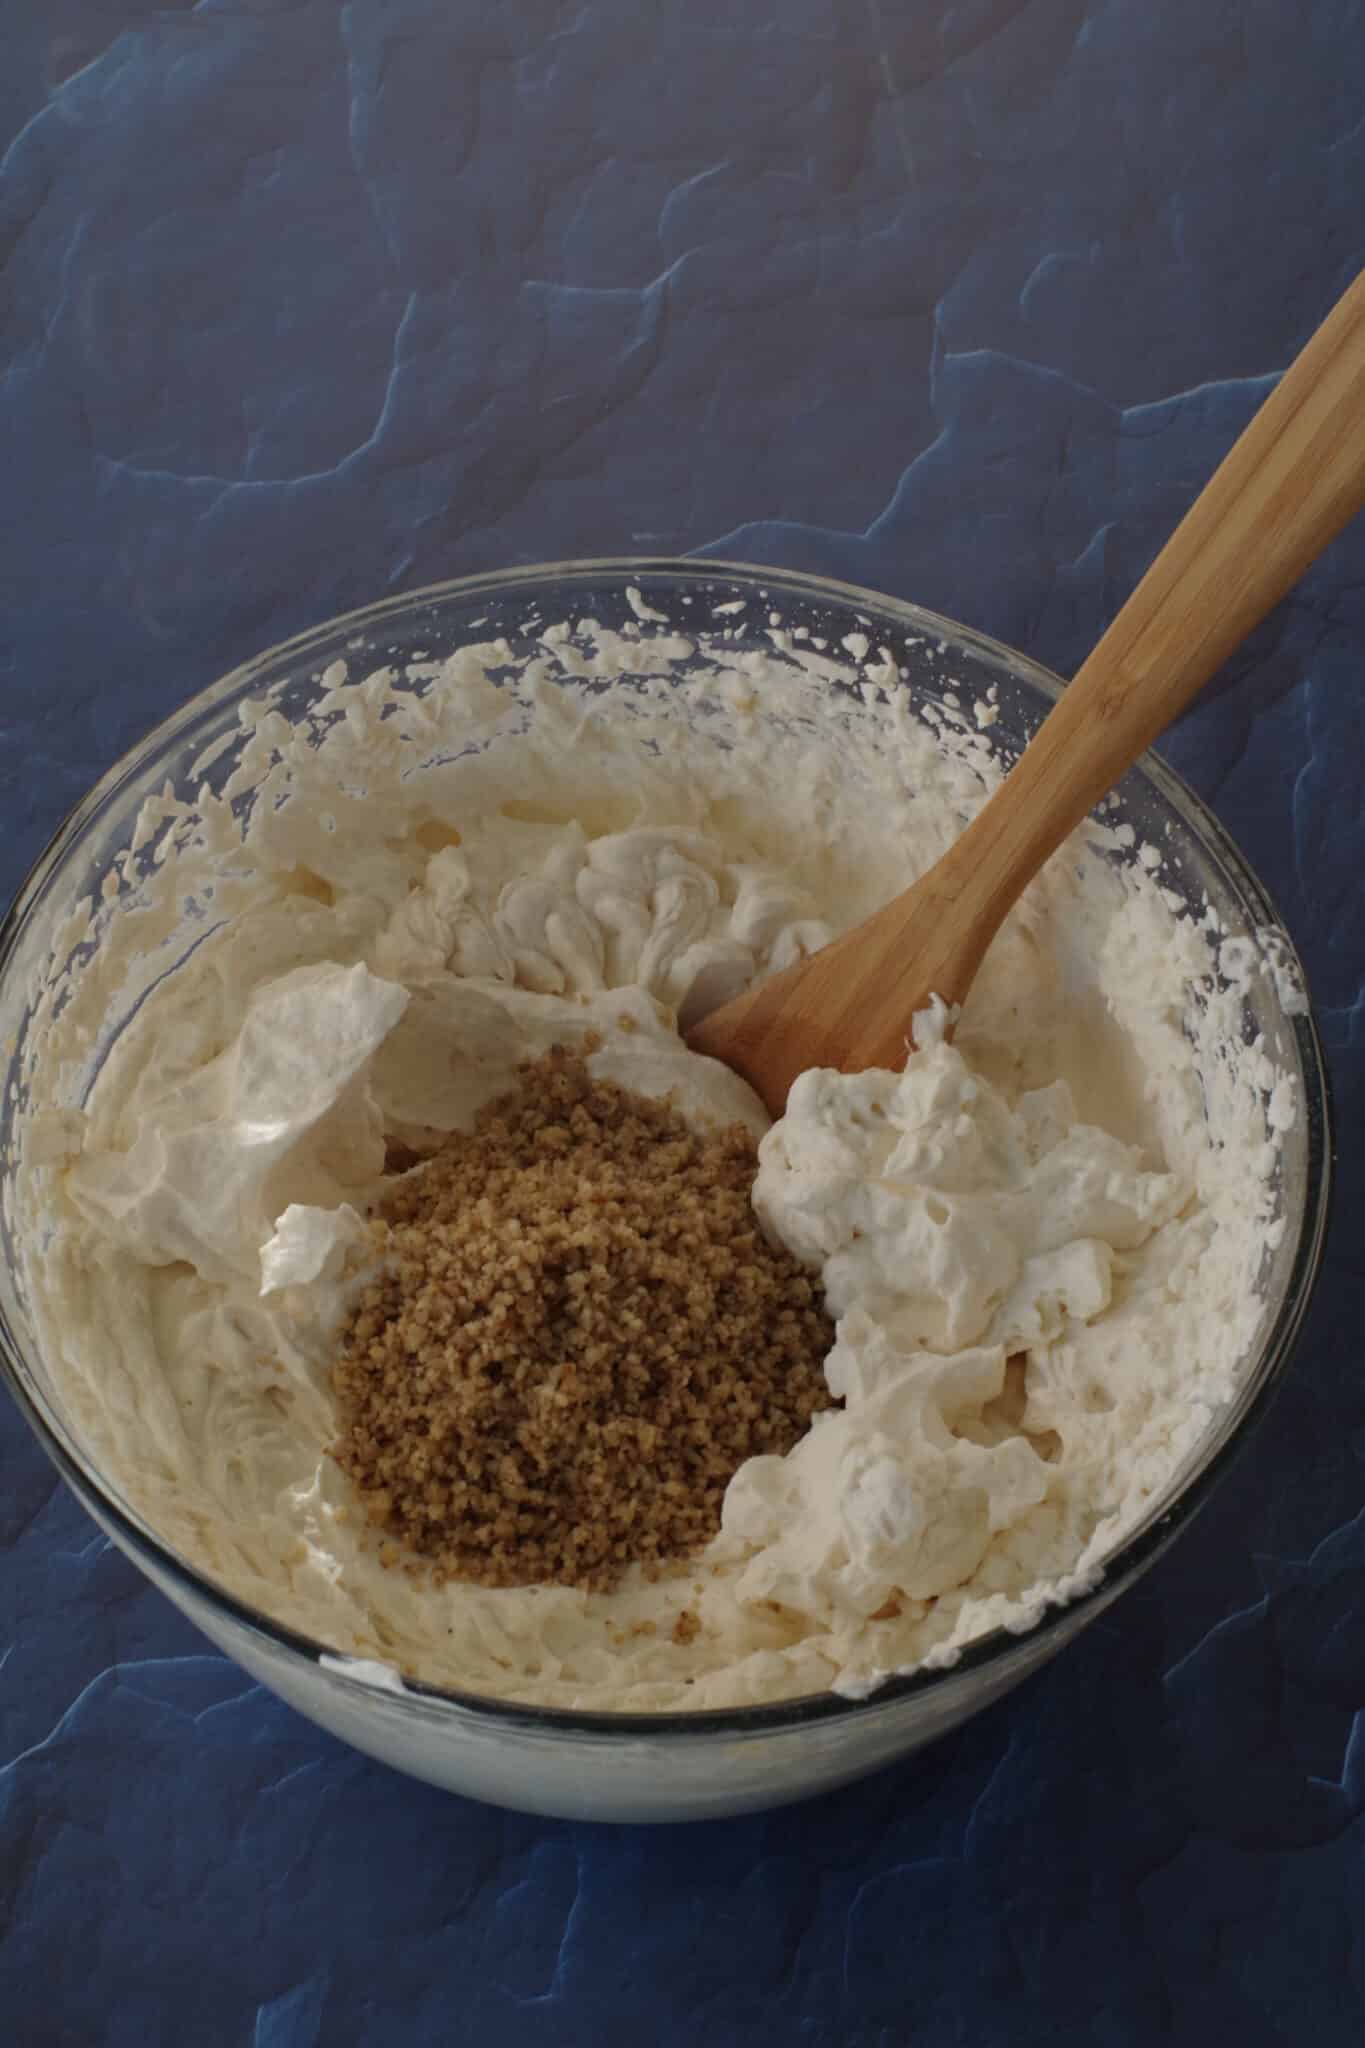 ground walnuts in glass bowl with whipped cream frosting and wooden spoon